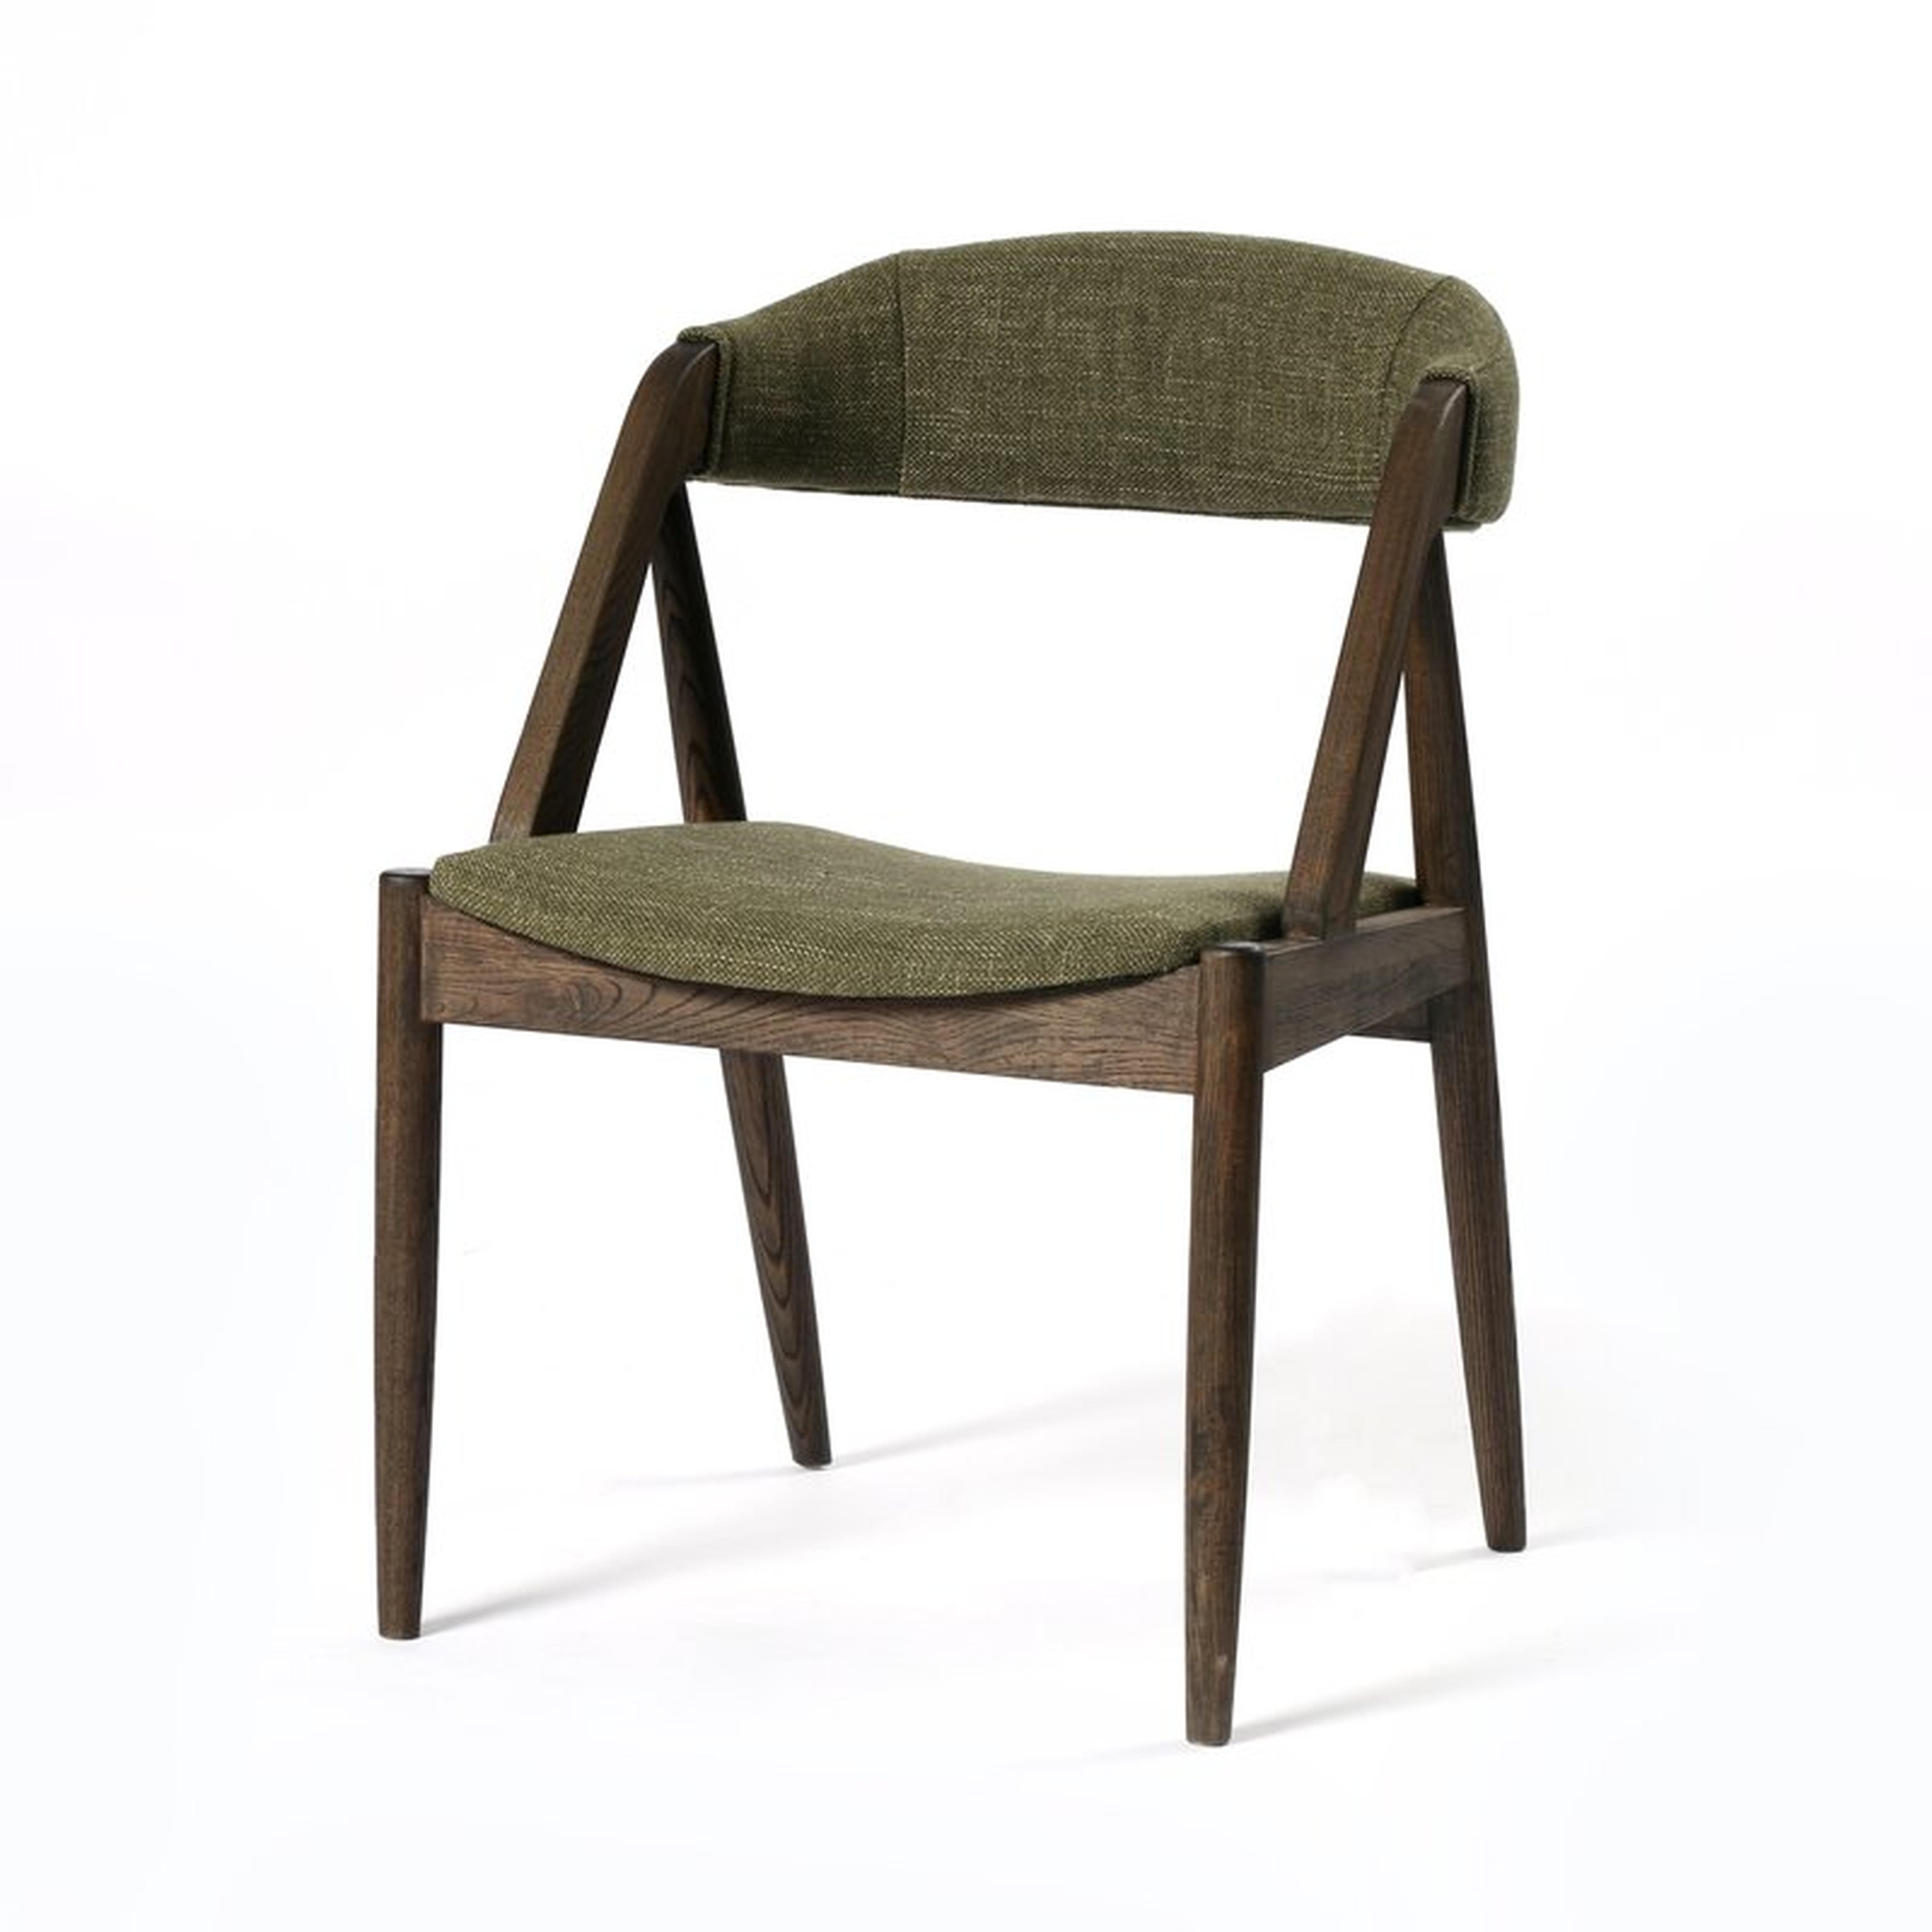 Four Hands Ashford Upholstered Side Chair in Greenfield - Perigold